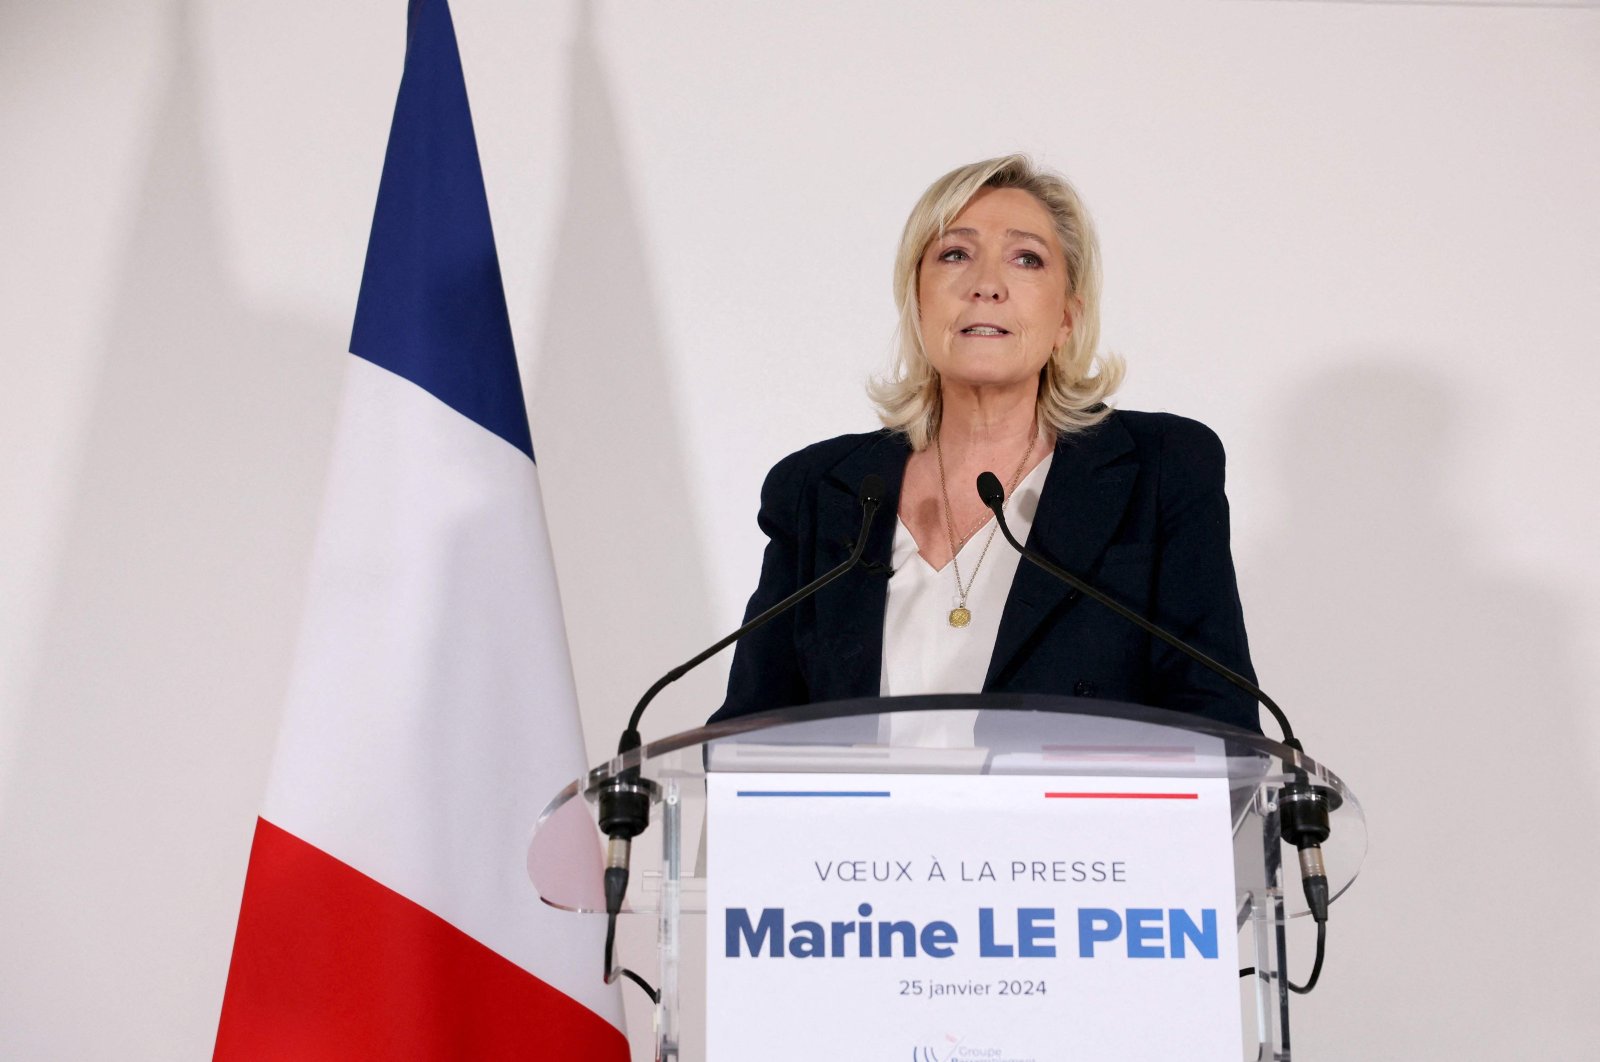 French far-right party Rassemblement National (RN) president Marine Le Pen addresses her New Year wishes to the press during a news conference in Paris on Jan. 25, 2024. (AFP Photo)